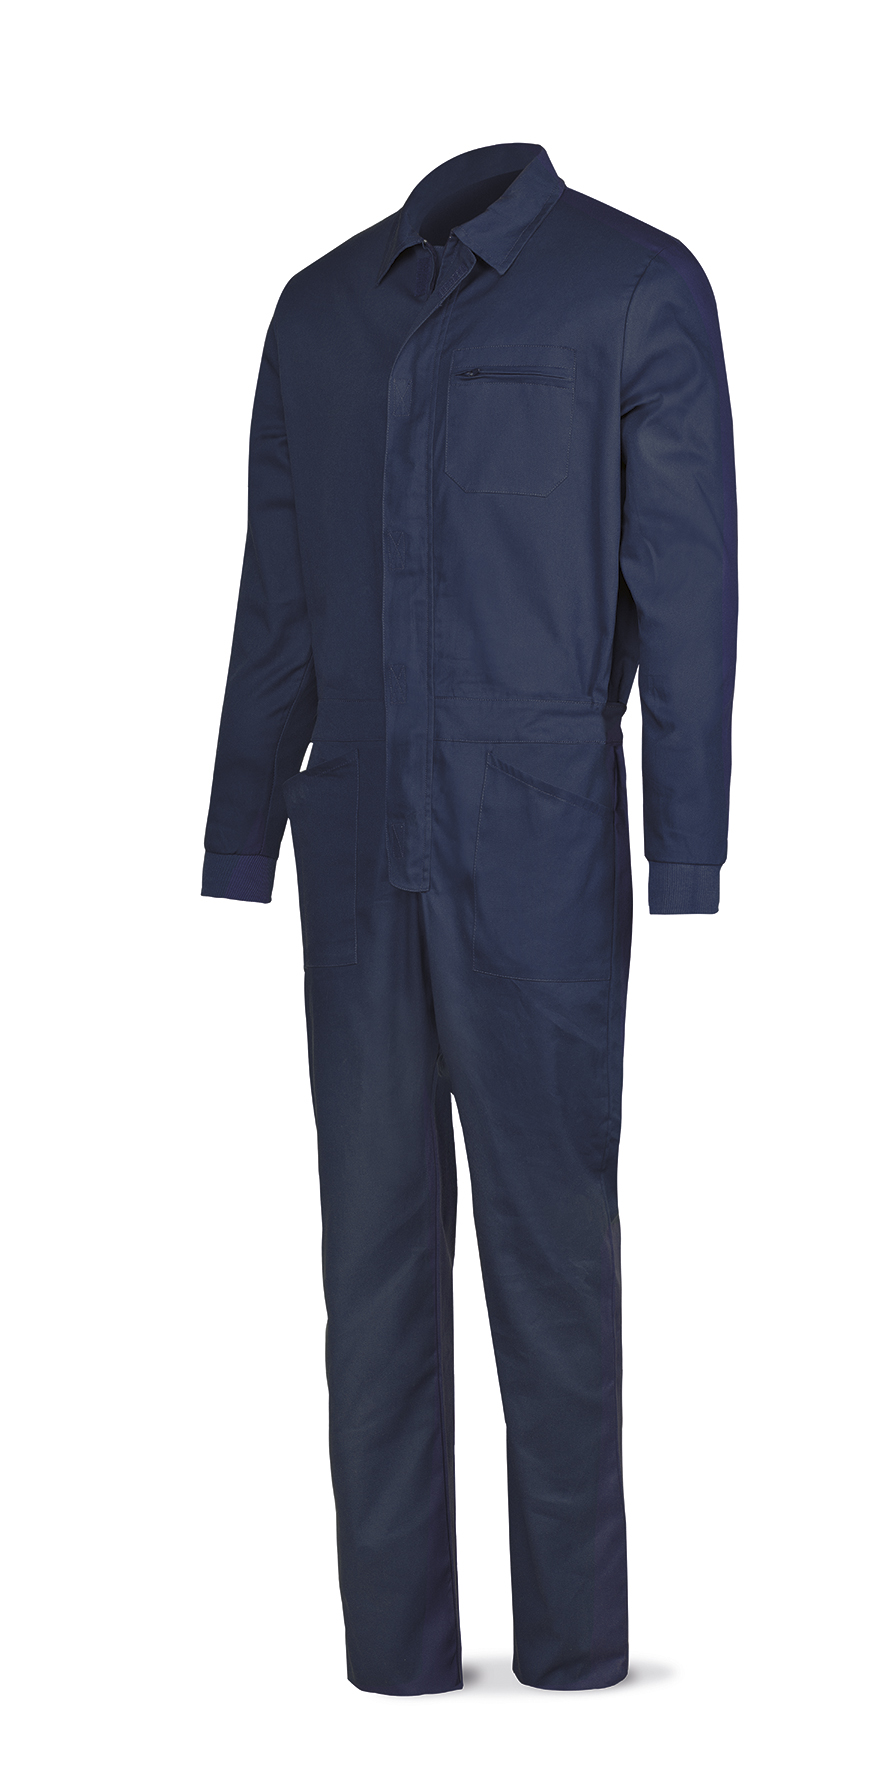 388-BAM Workwear Basic Line Navy blue cotton coverall 200 gr.